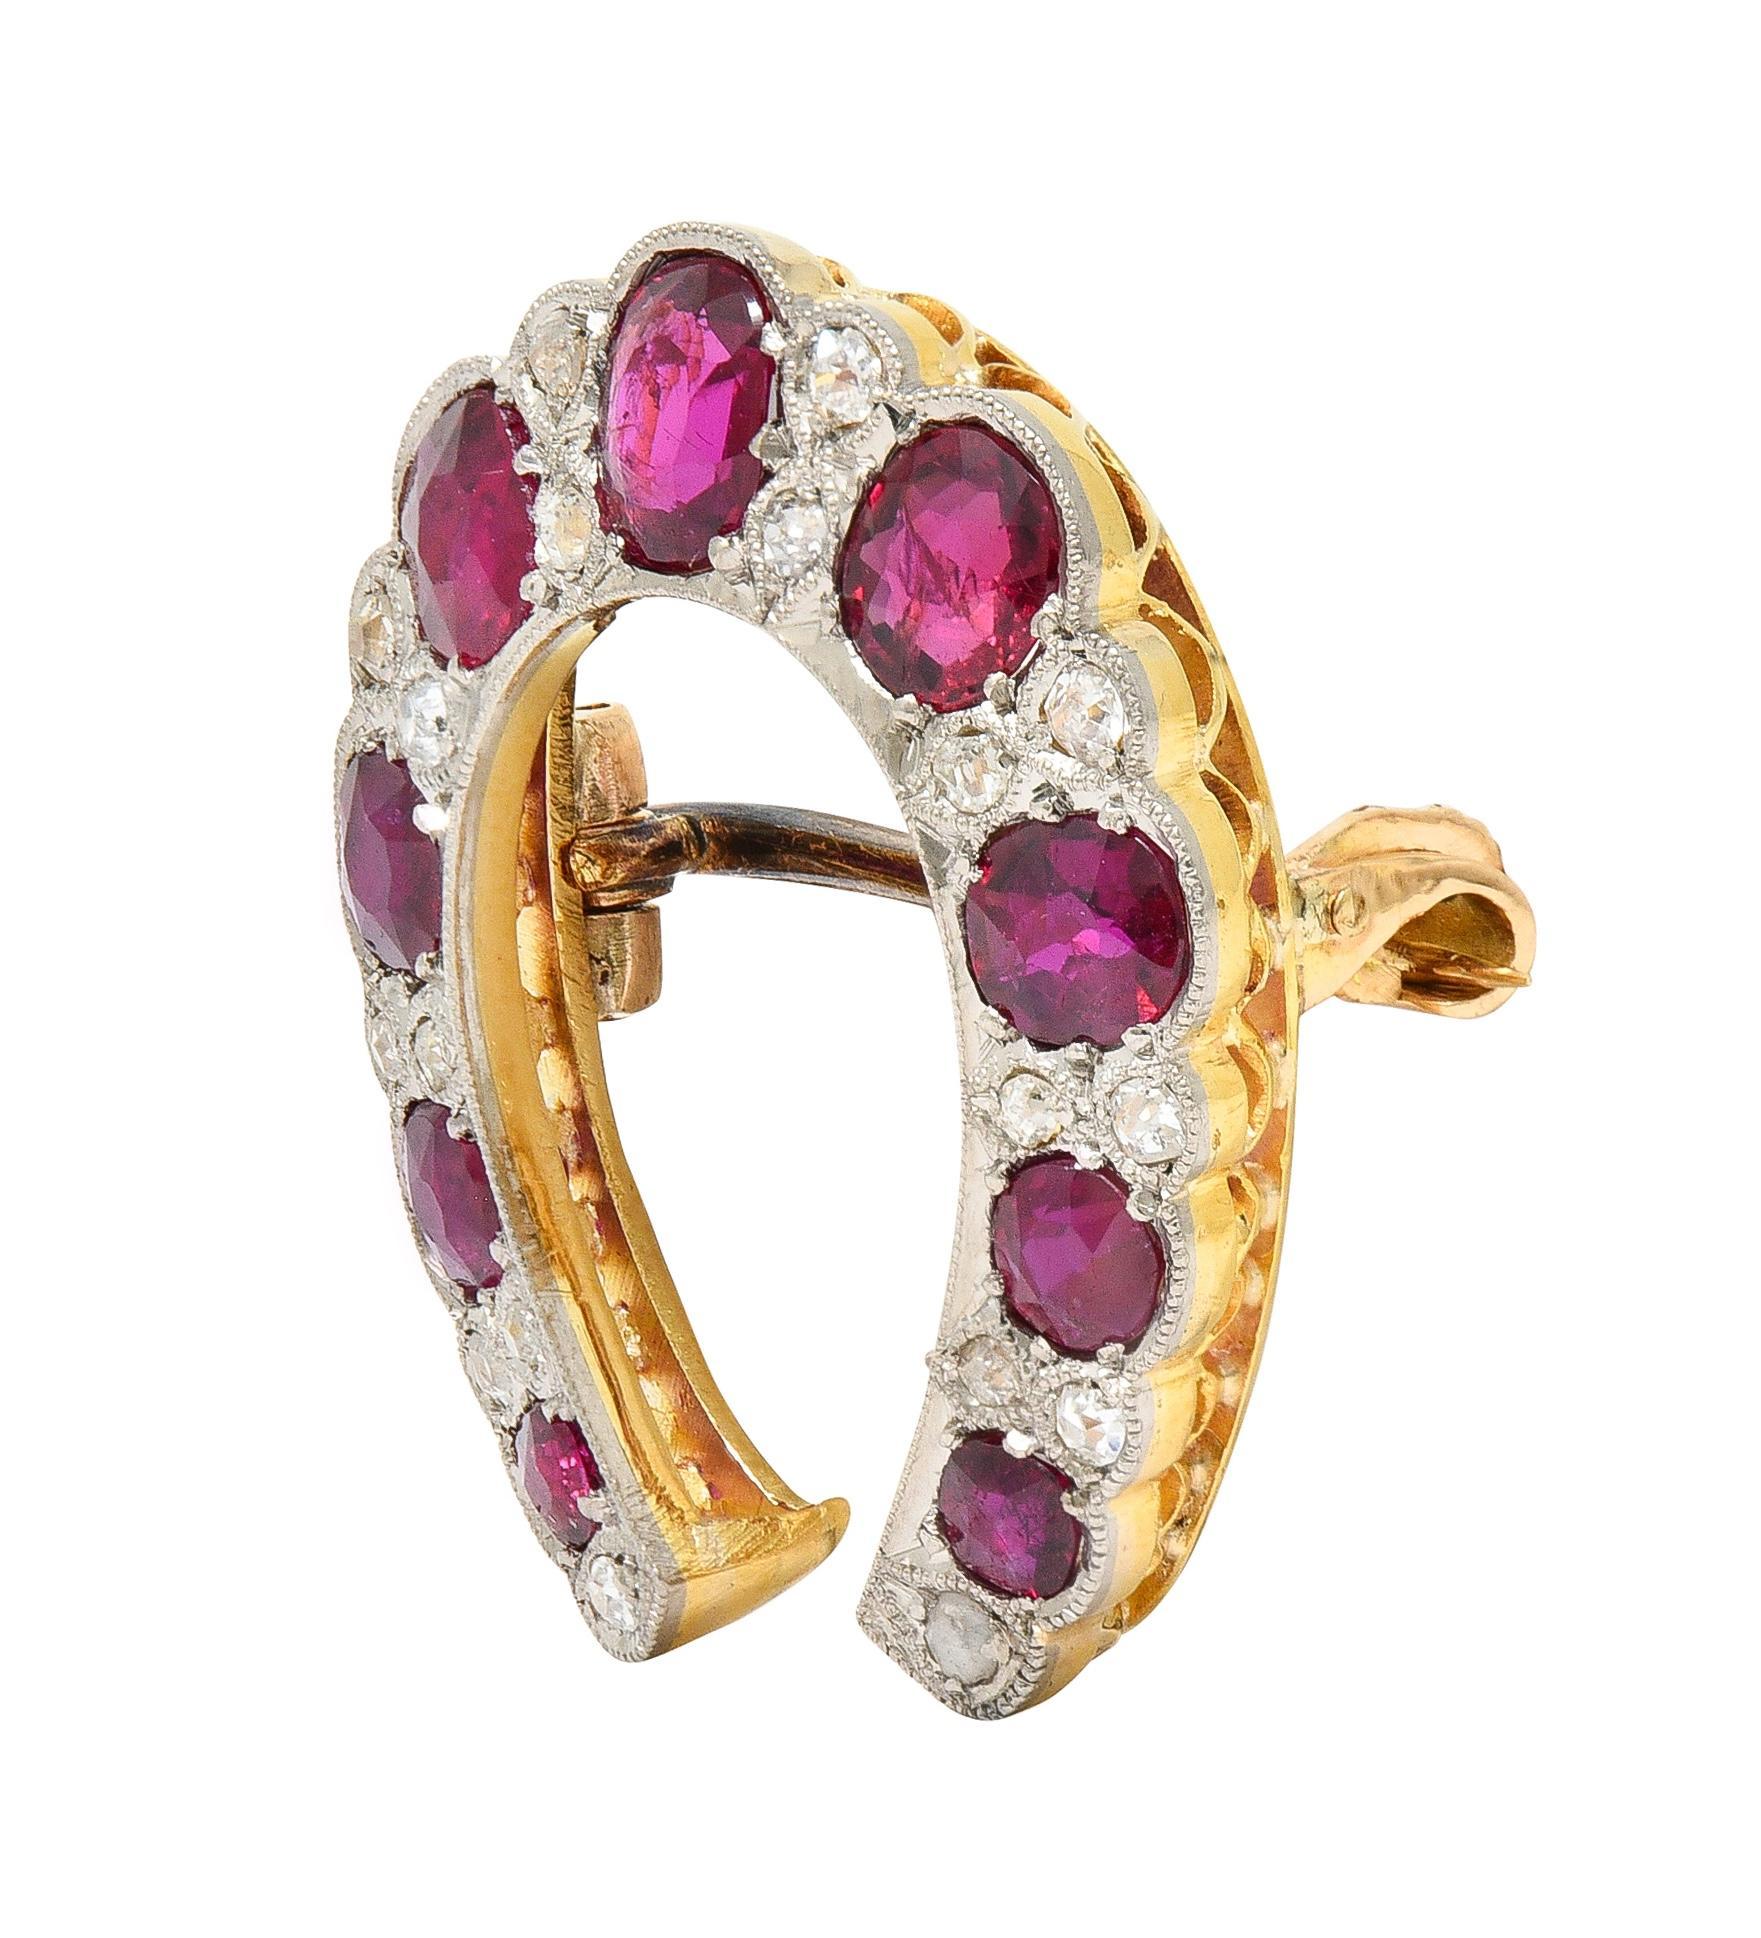 Designed as a platinum-topped horseshoe shape featuring bead set cushion cut rubies throughout
Weighing approximately 2.48 carats total - transparent medium red in color 
Alternating in pattern with bead set old single cut diamonds
Weighing